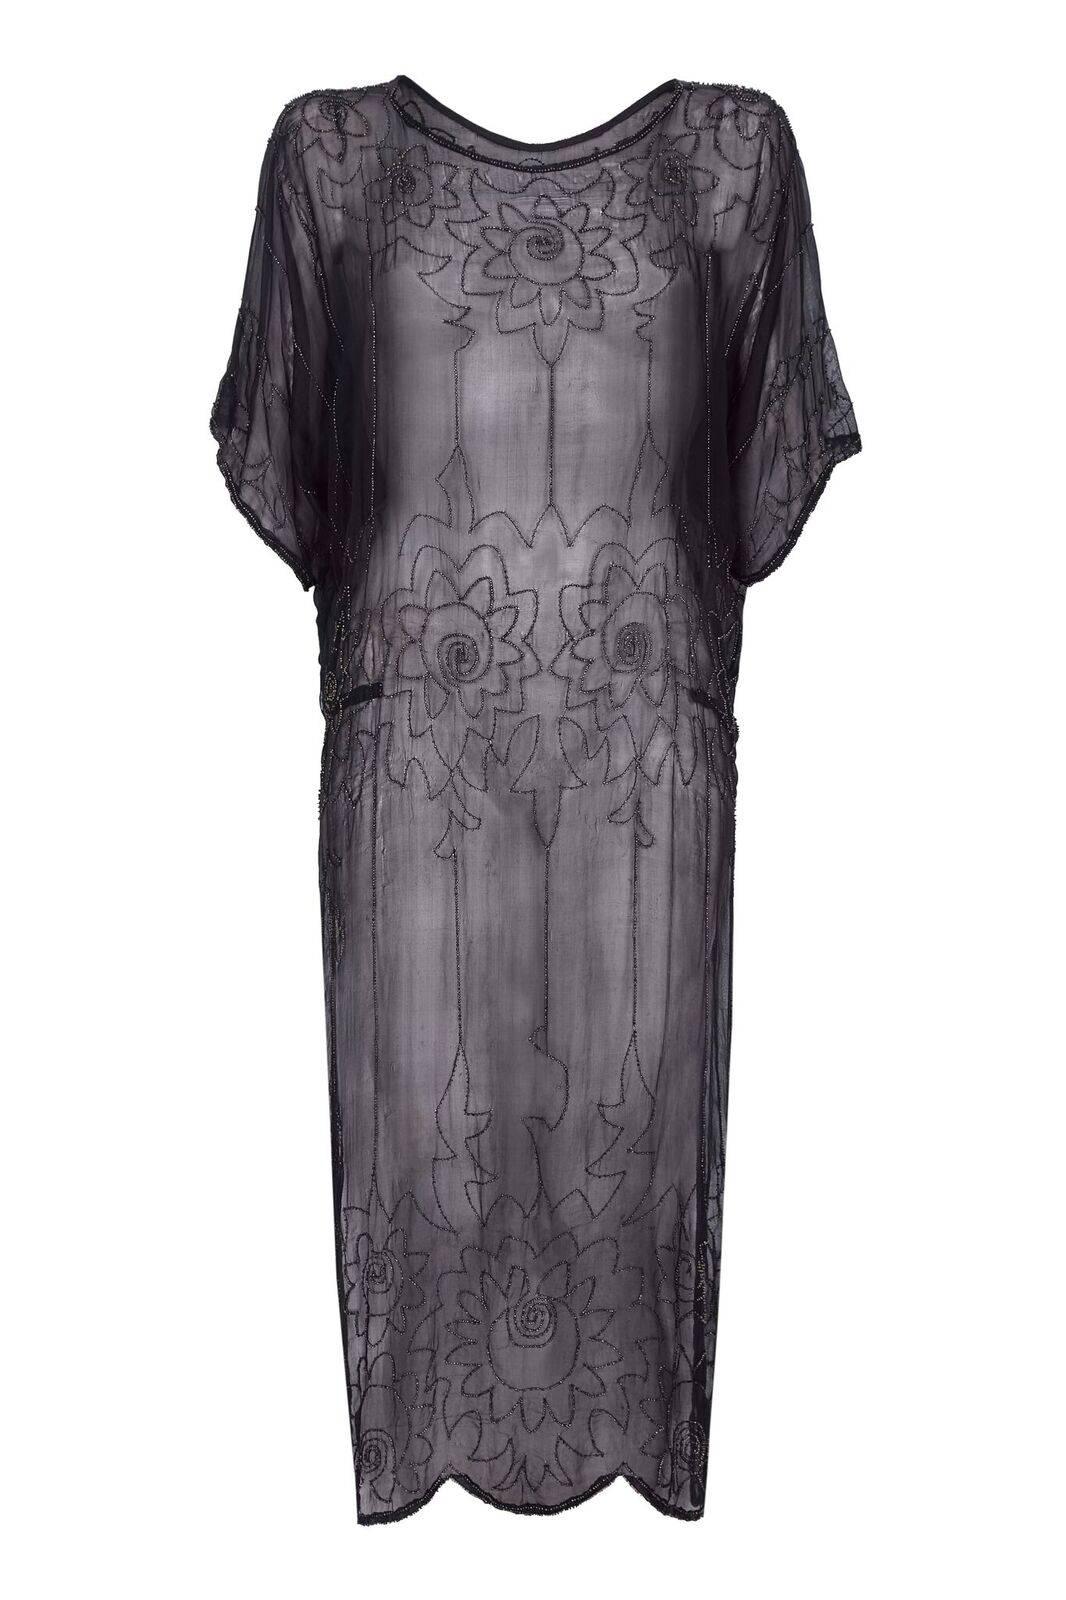 This exquisite 1920s silk chiffon flapper dress is in immaculate condition, especially for a piece of this period. The delicate rocaille bead embellishments are black and bronze flecked and give weight to the featherlight fabric. The Art Deco floral